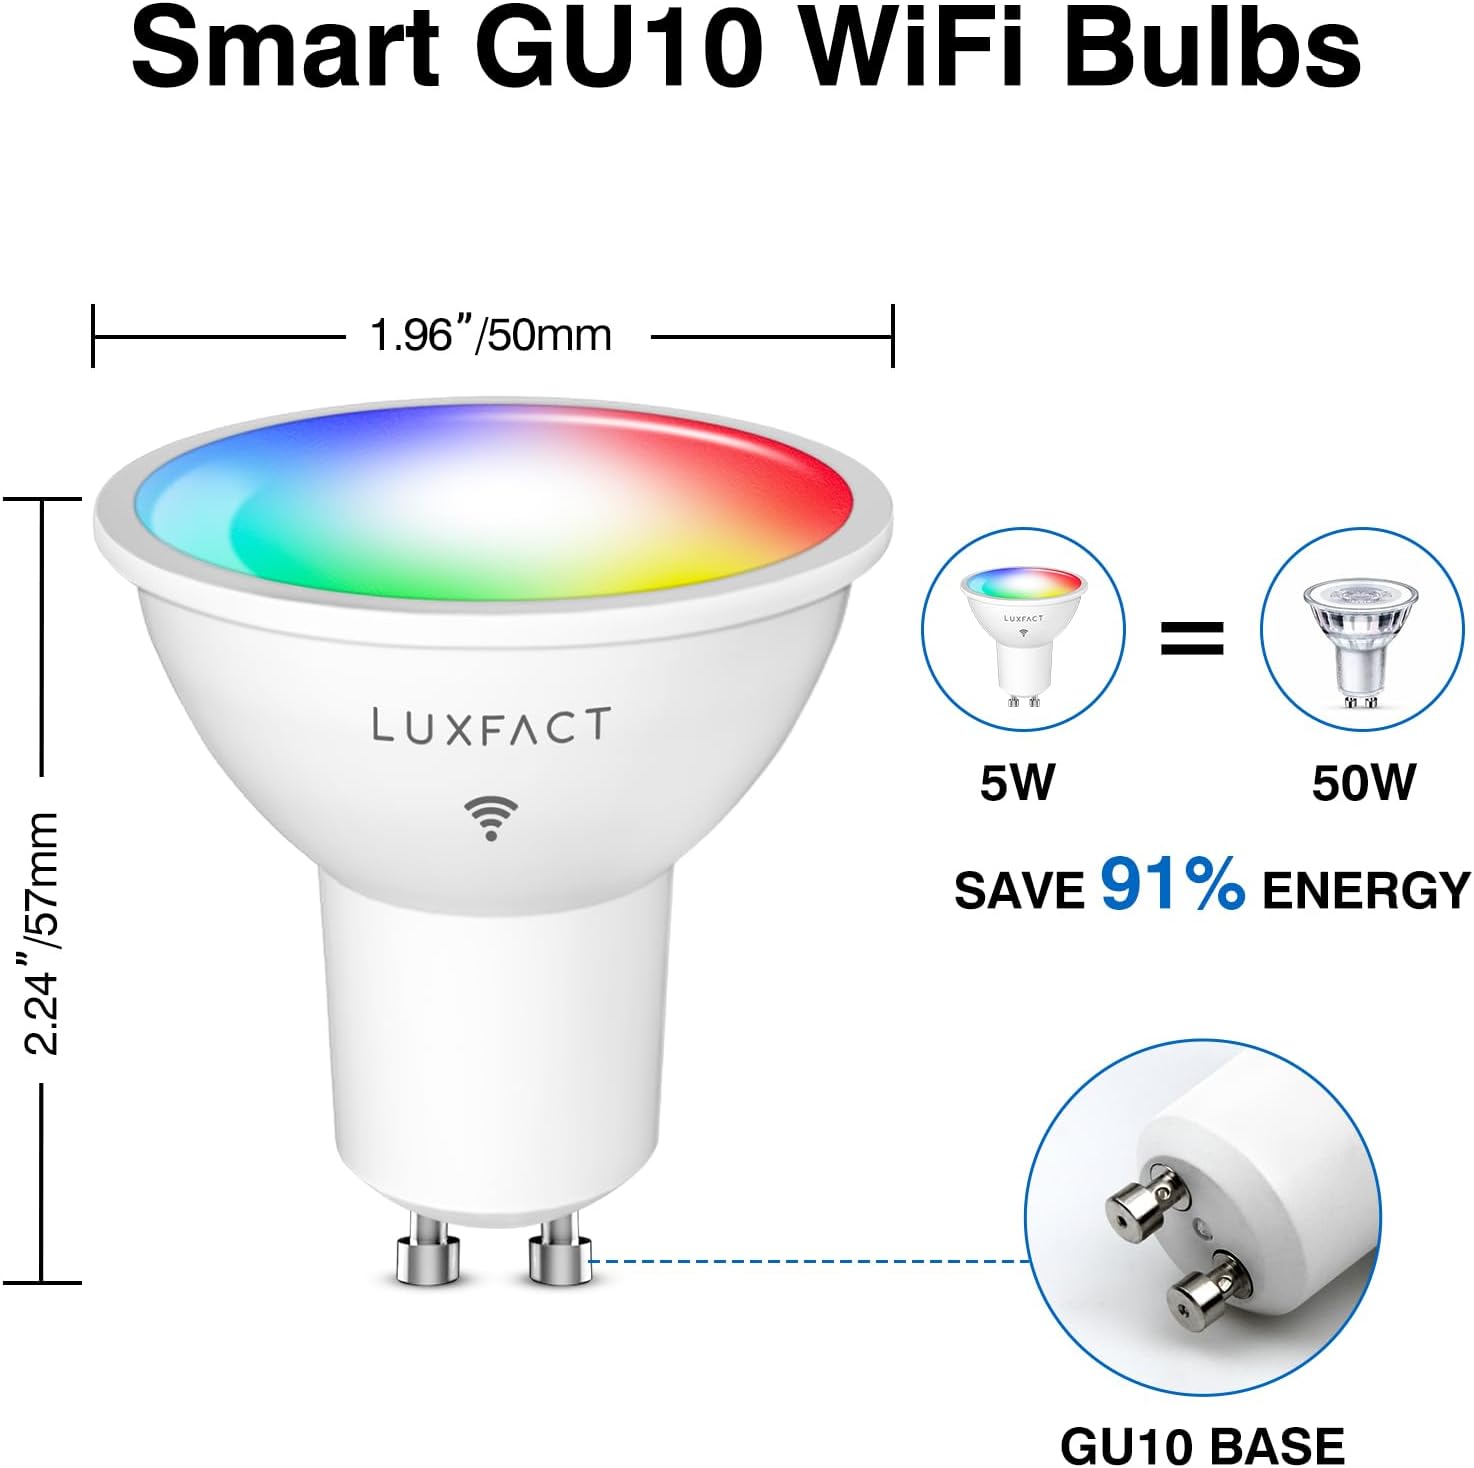 LUXFACT GU10 Smart LED Bulb Review